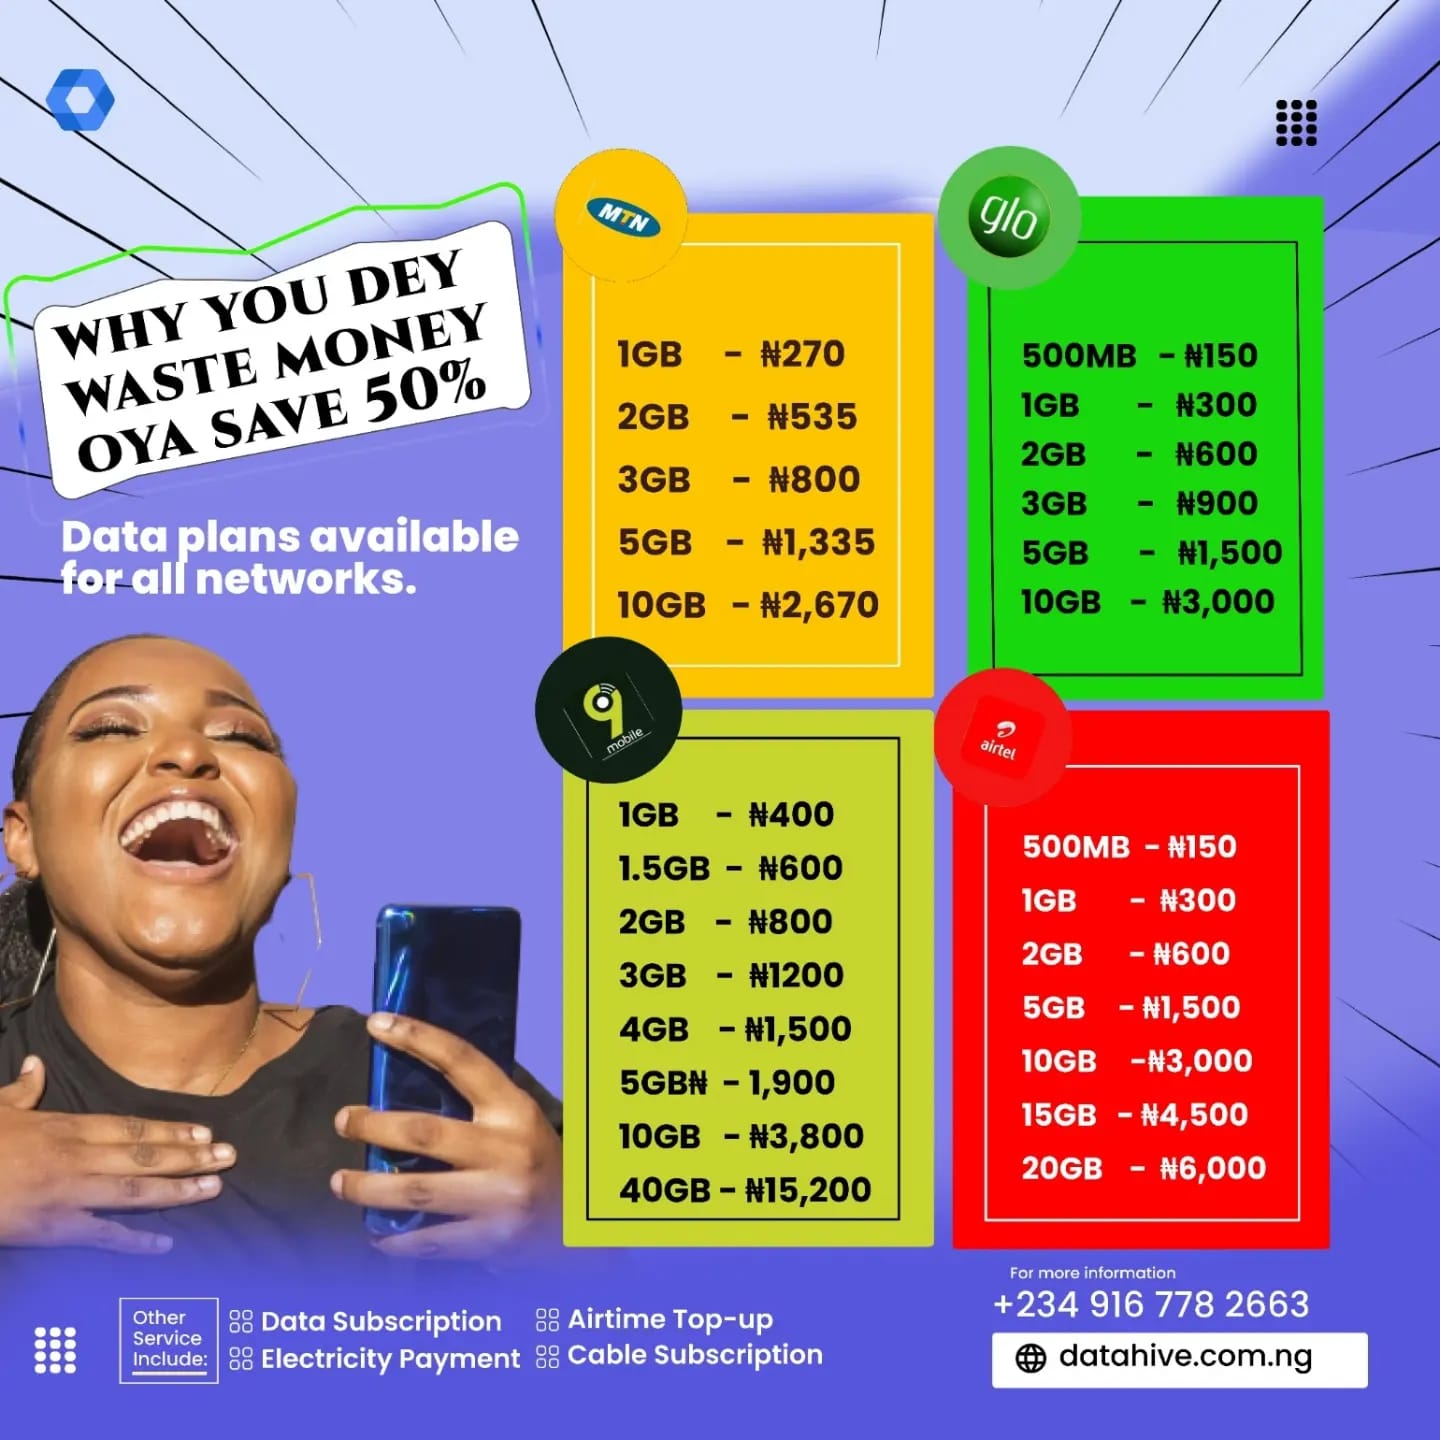 Get the cheapest internet data bundles at very affordable prices!